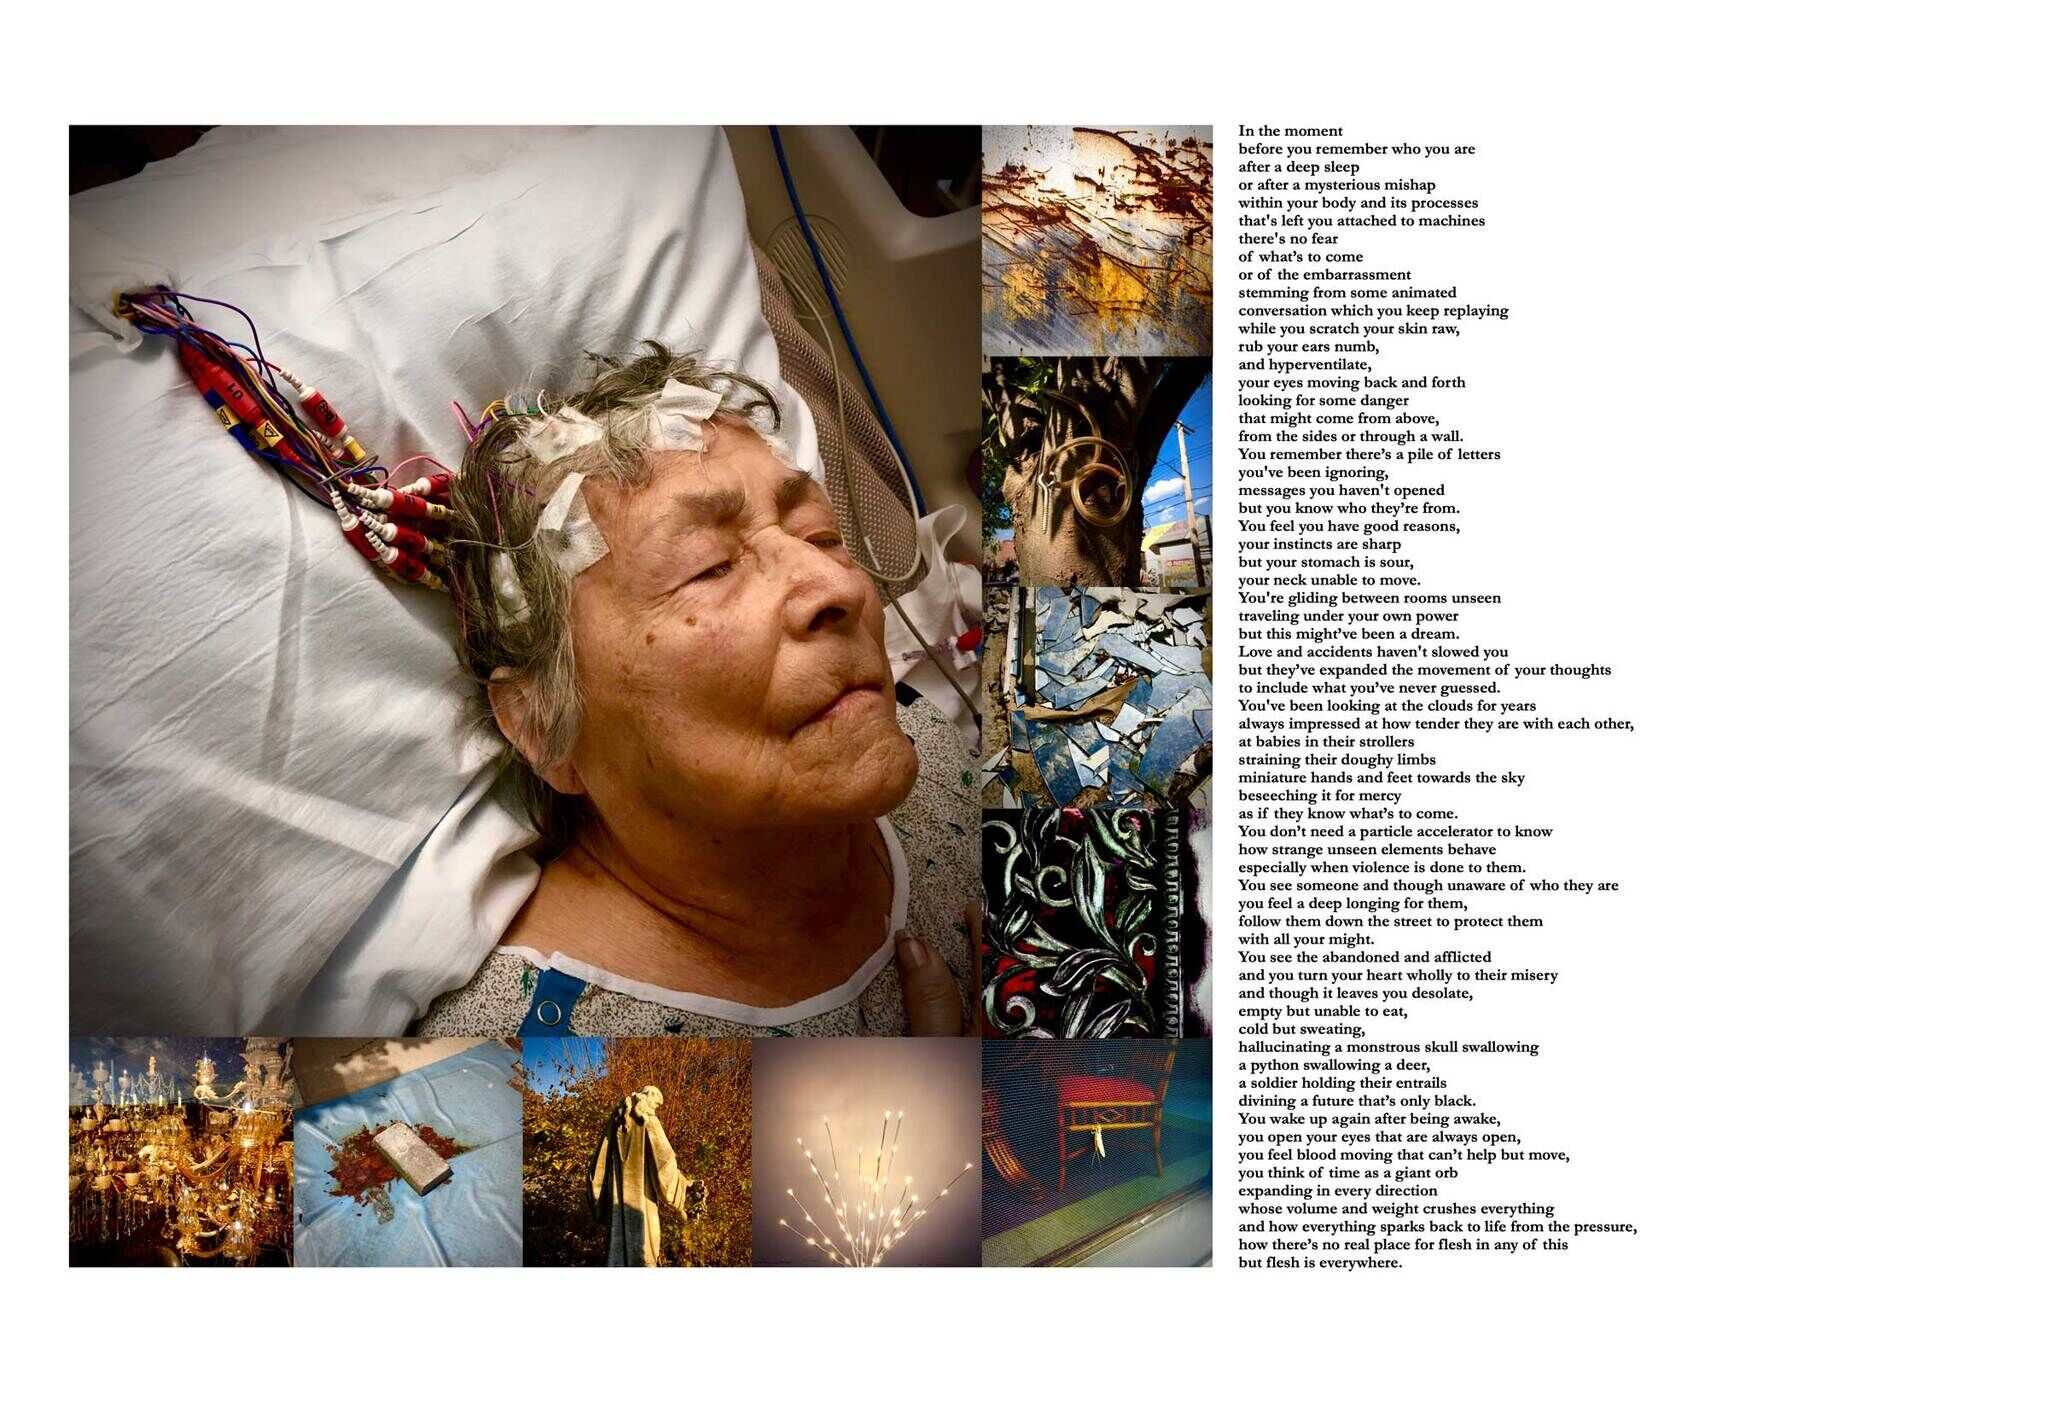 A photograph on a woman in a hospital bed with electrodes connected to her head surrounded by smaller abstract photographs. On the right of the photographs is a poem.